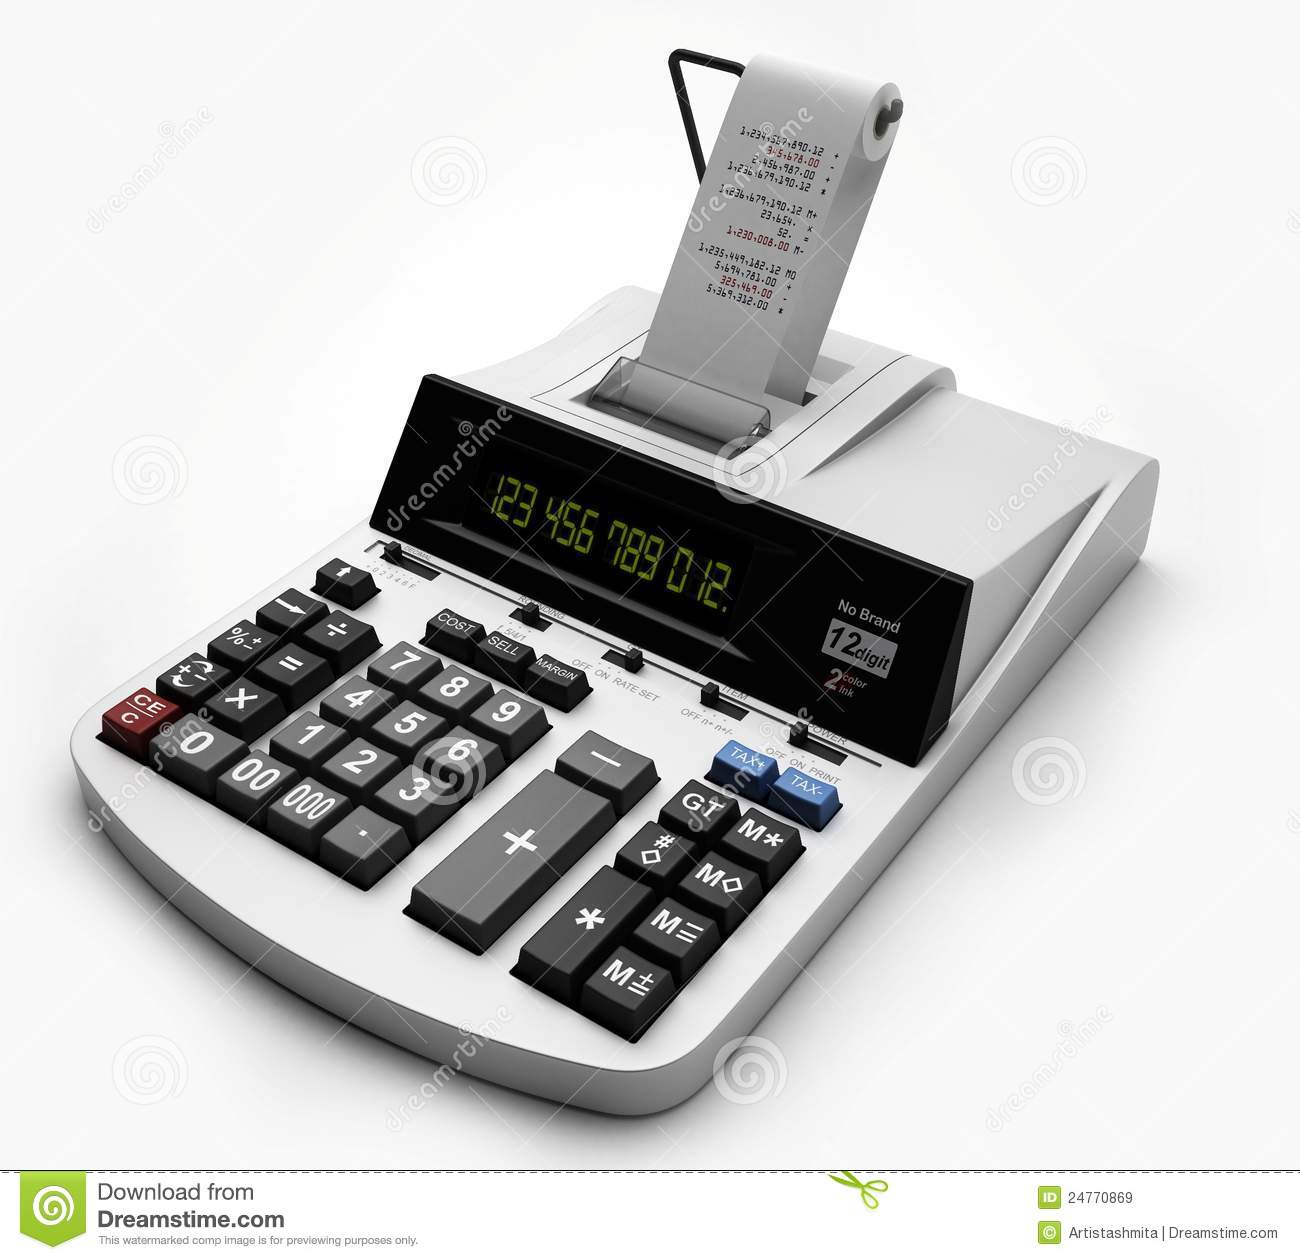 Pos Or Point Of Sale Terminal To Quickly Tab In The Sales And Take